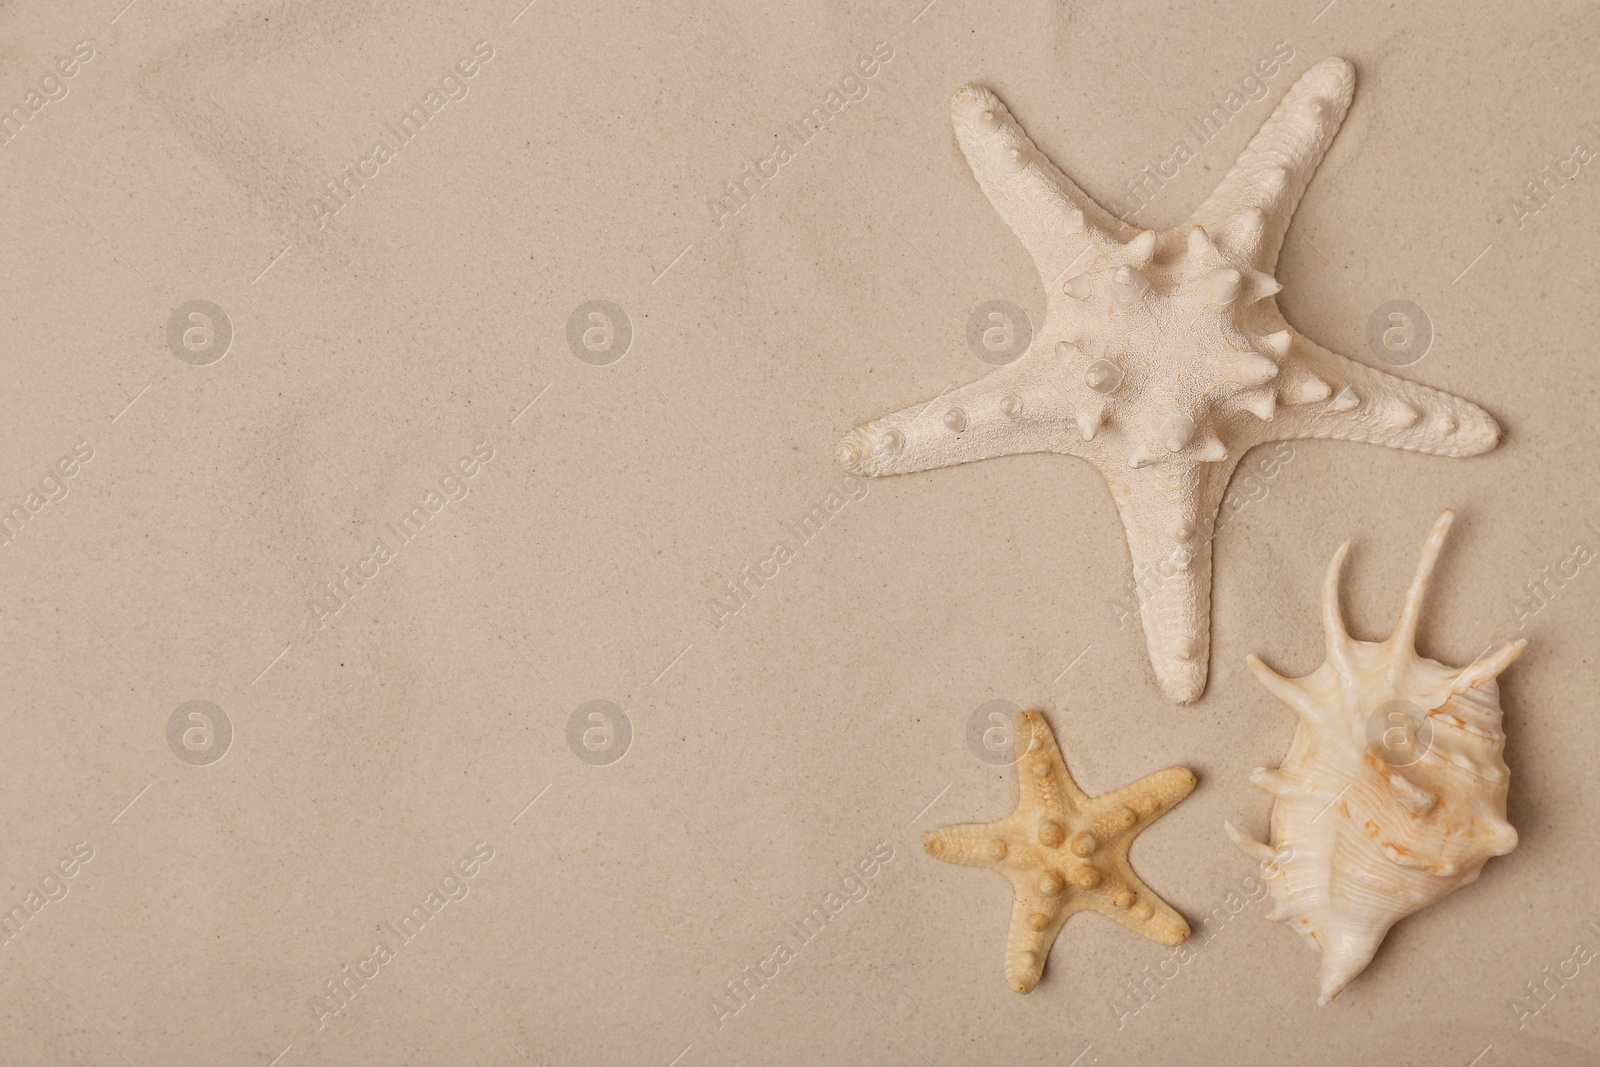 Photo of Starfishes and shell on beach sand, top view with space for text